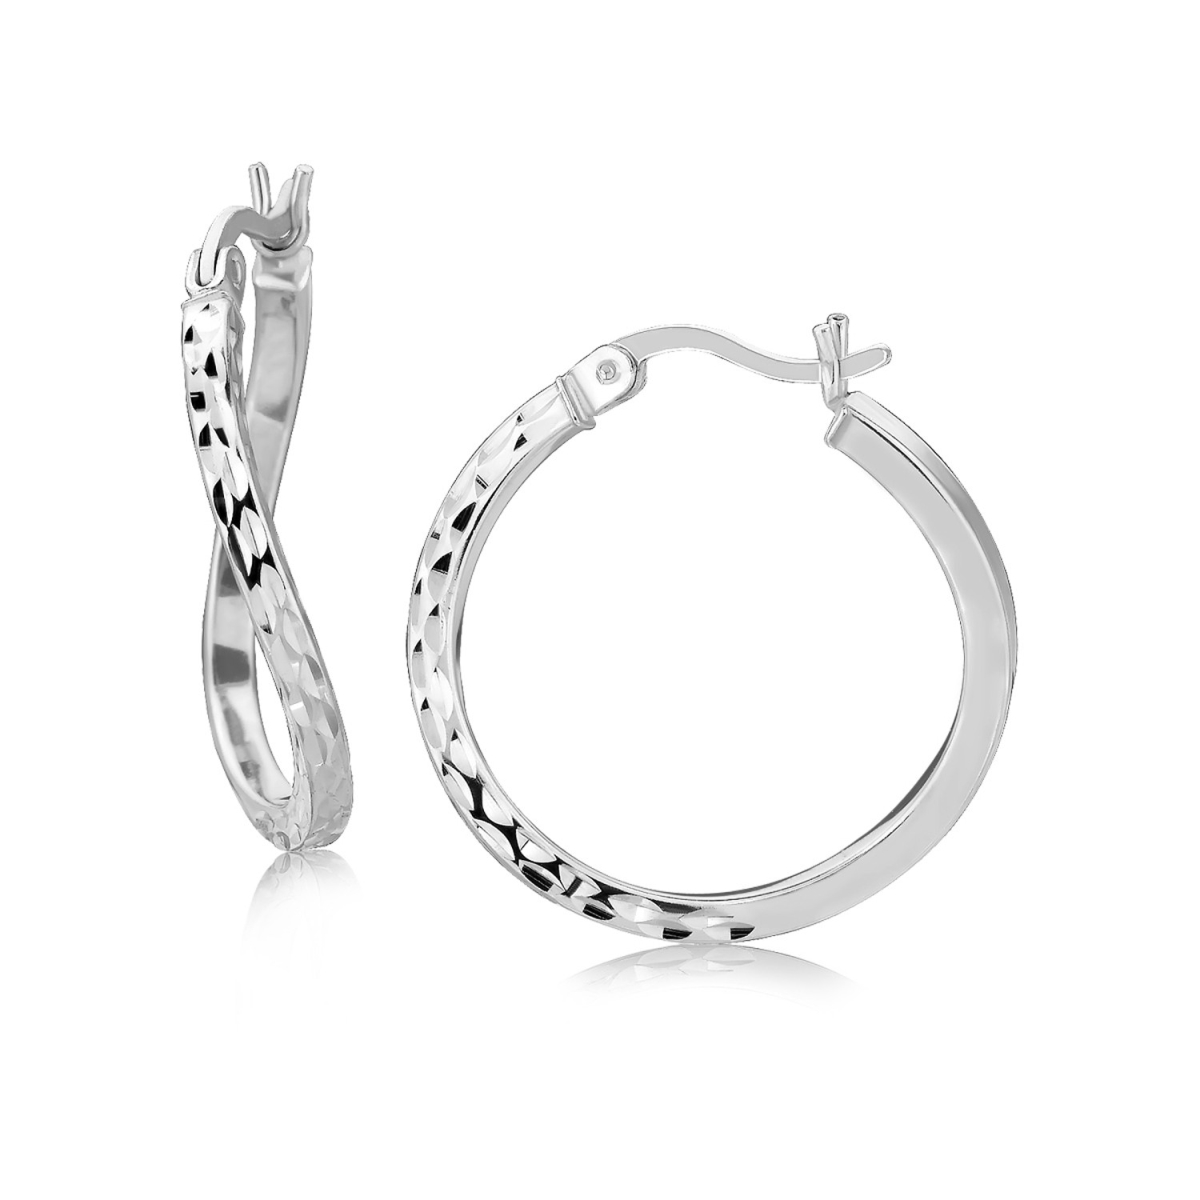 Picture of Iconic Jewels D195263 Sterling Silver Rhodium Plated Twist Style Hoop Diamond Cut Earrings - 20 mm